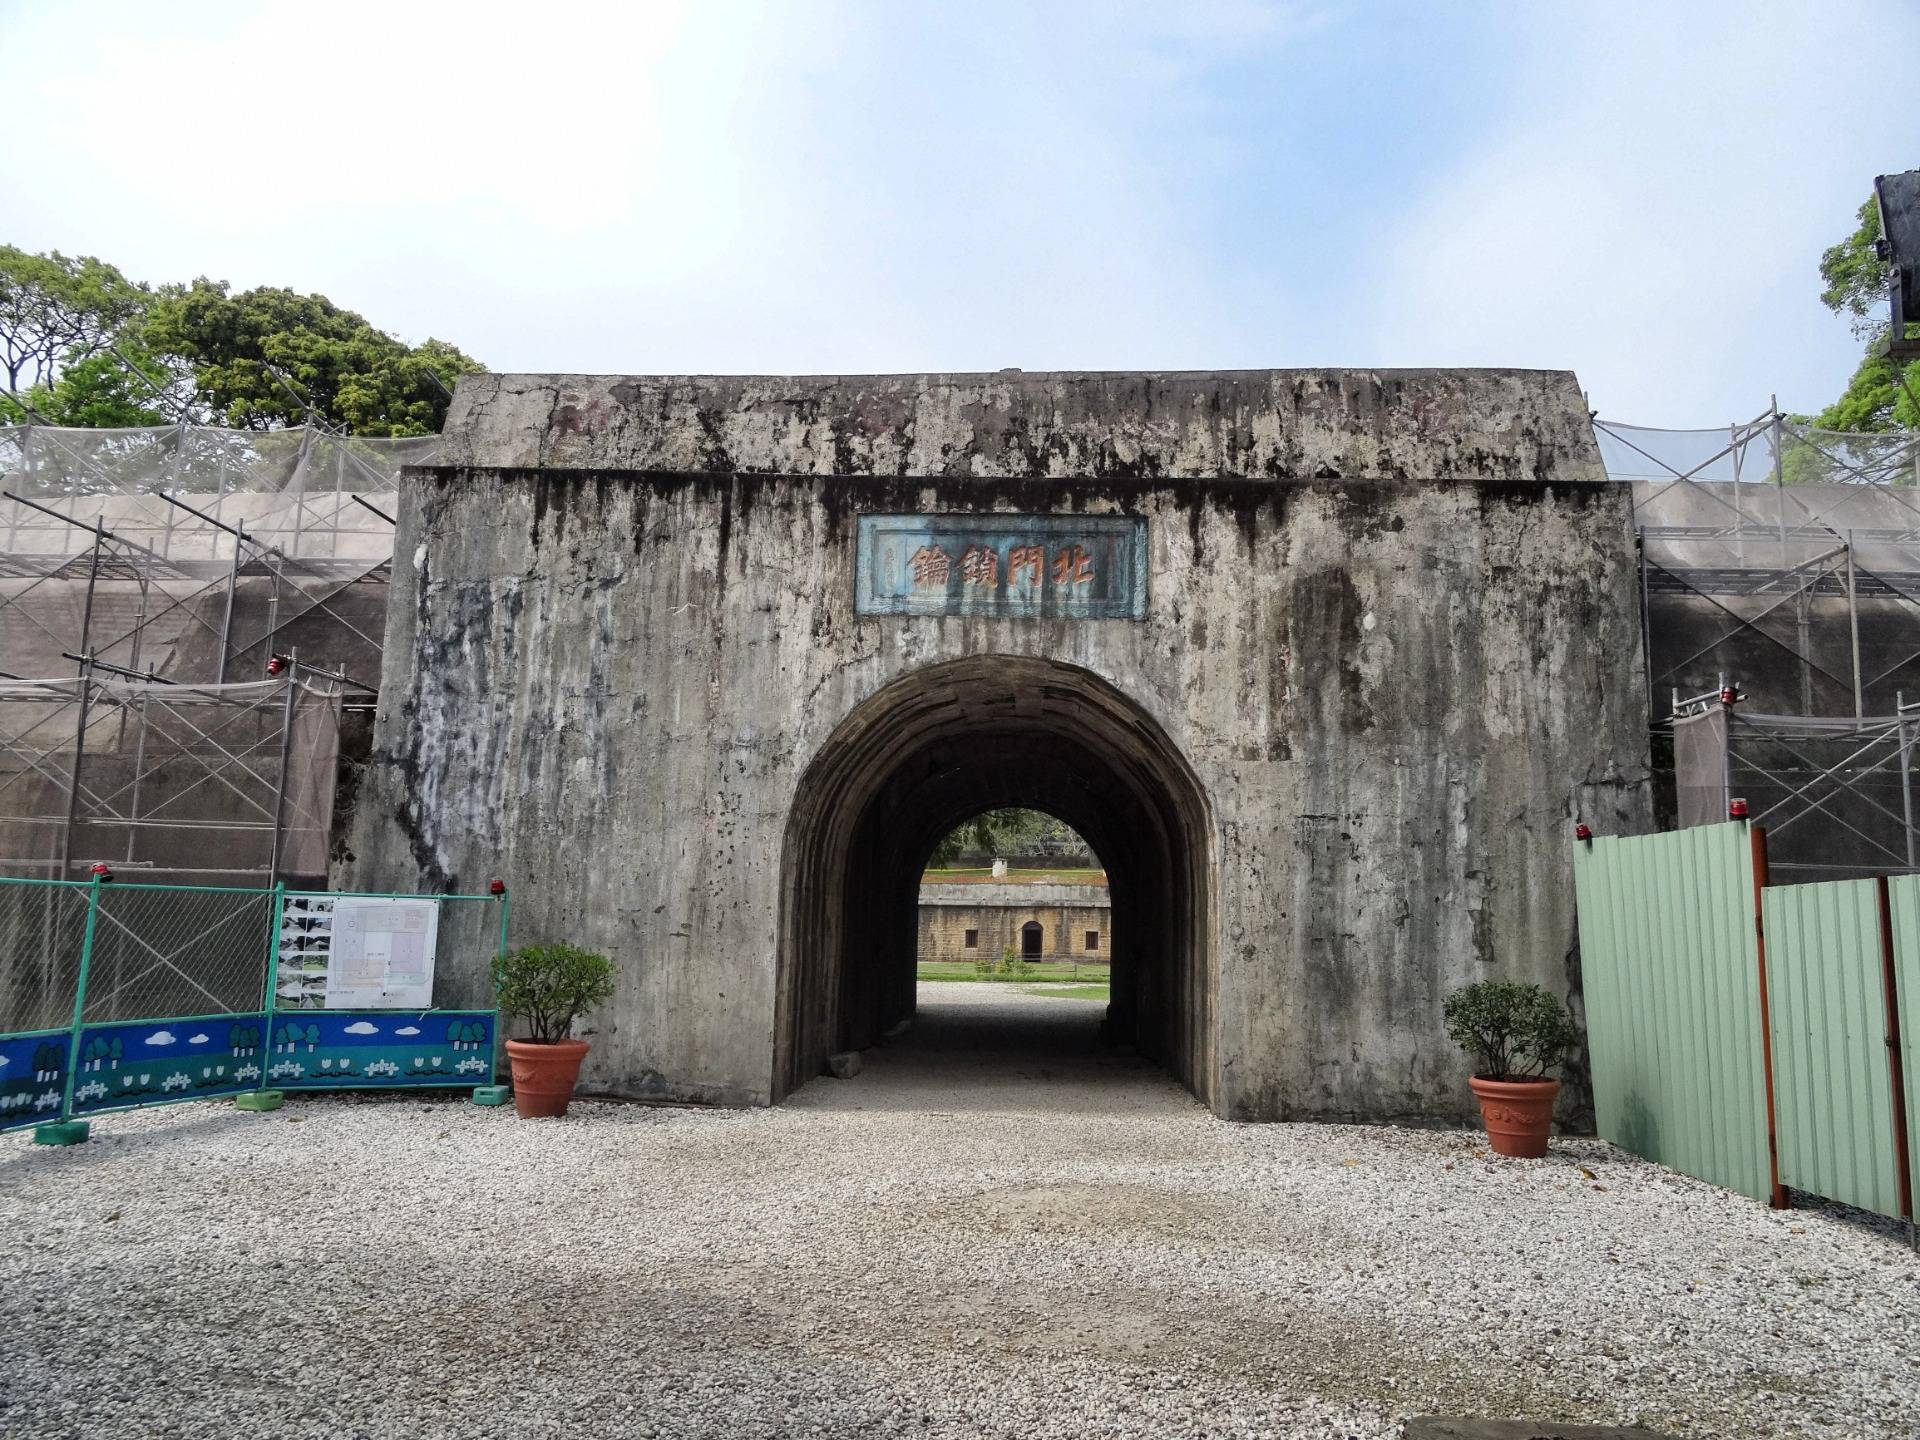 The gate to the fort